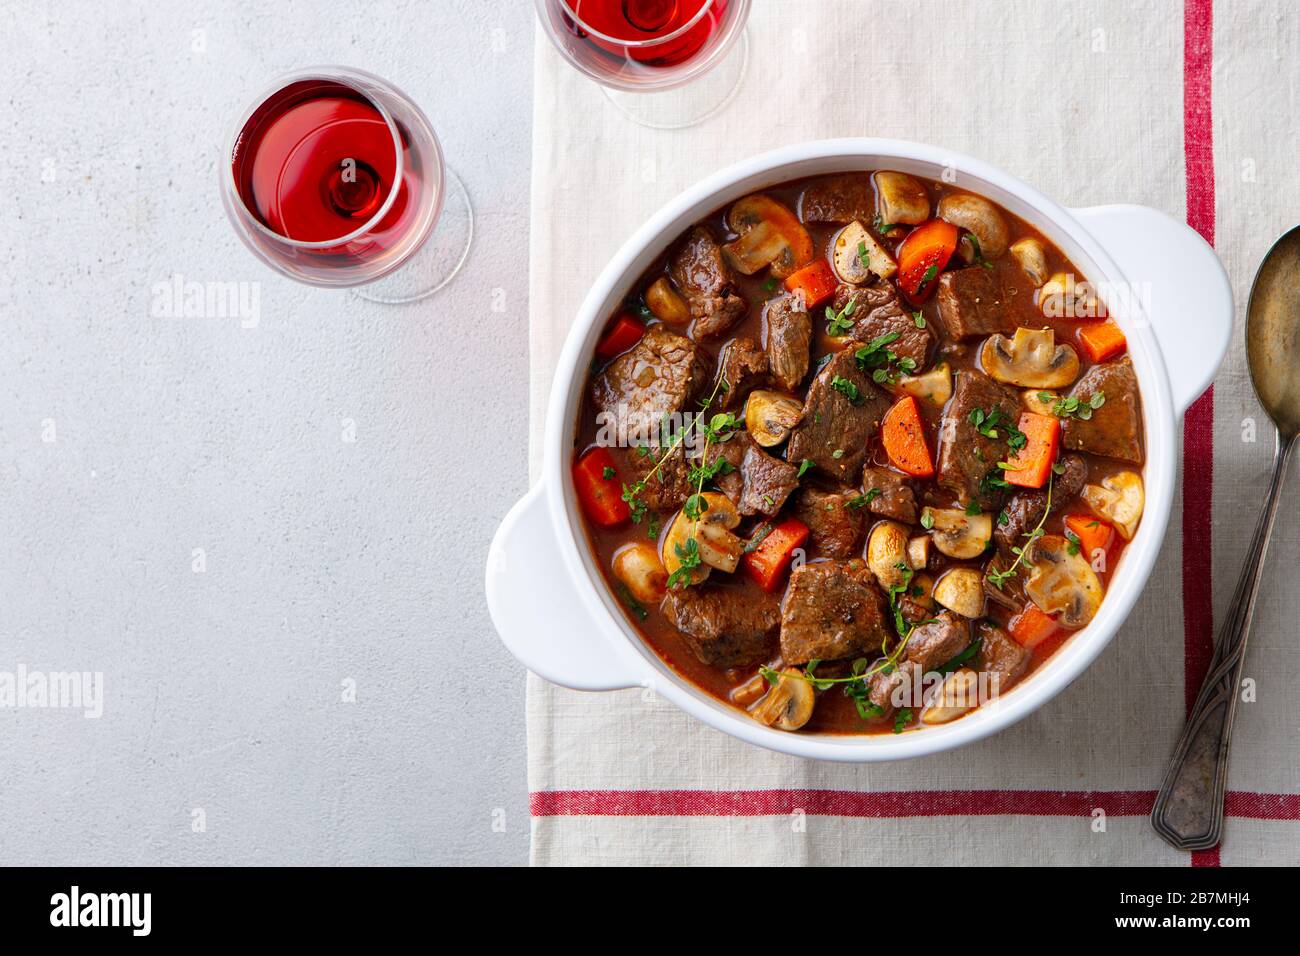 Beef bourguignon stew with vegetables and red wine. Grey background. Top view. Stock Photo